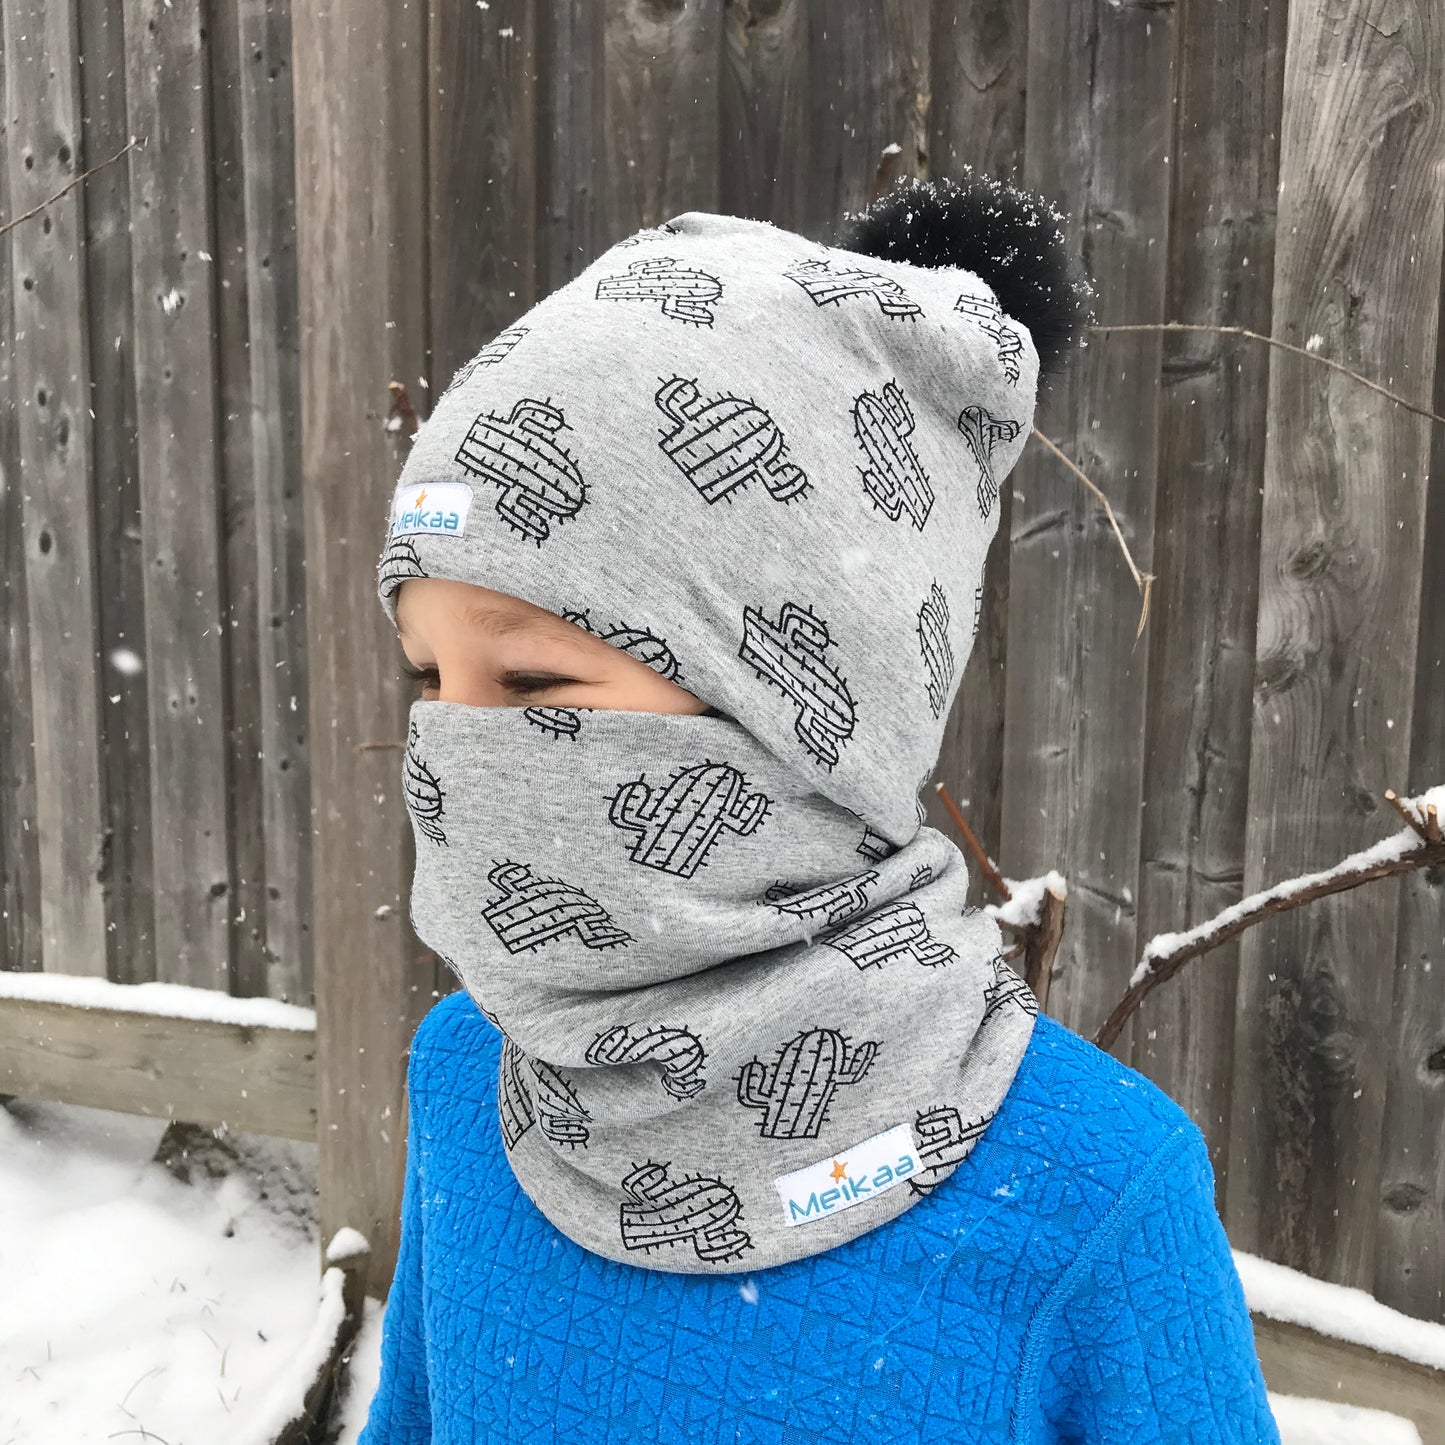 Kids and Adults Winter Neck Warmers